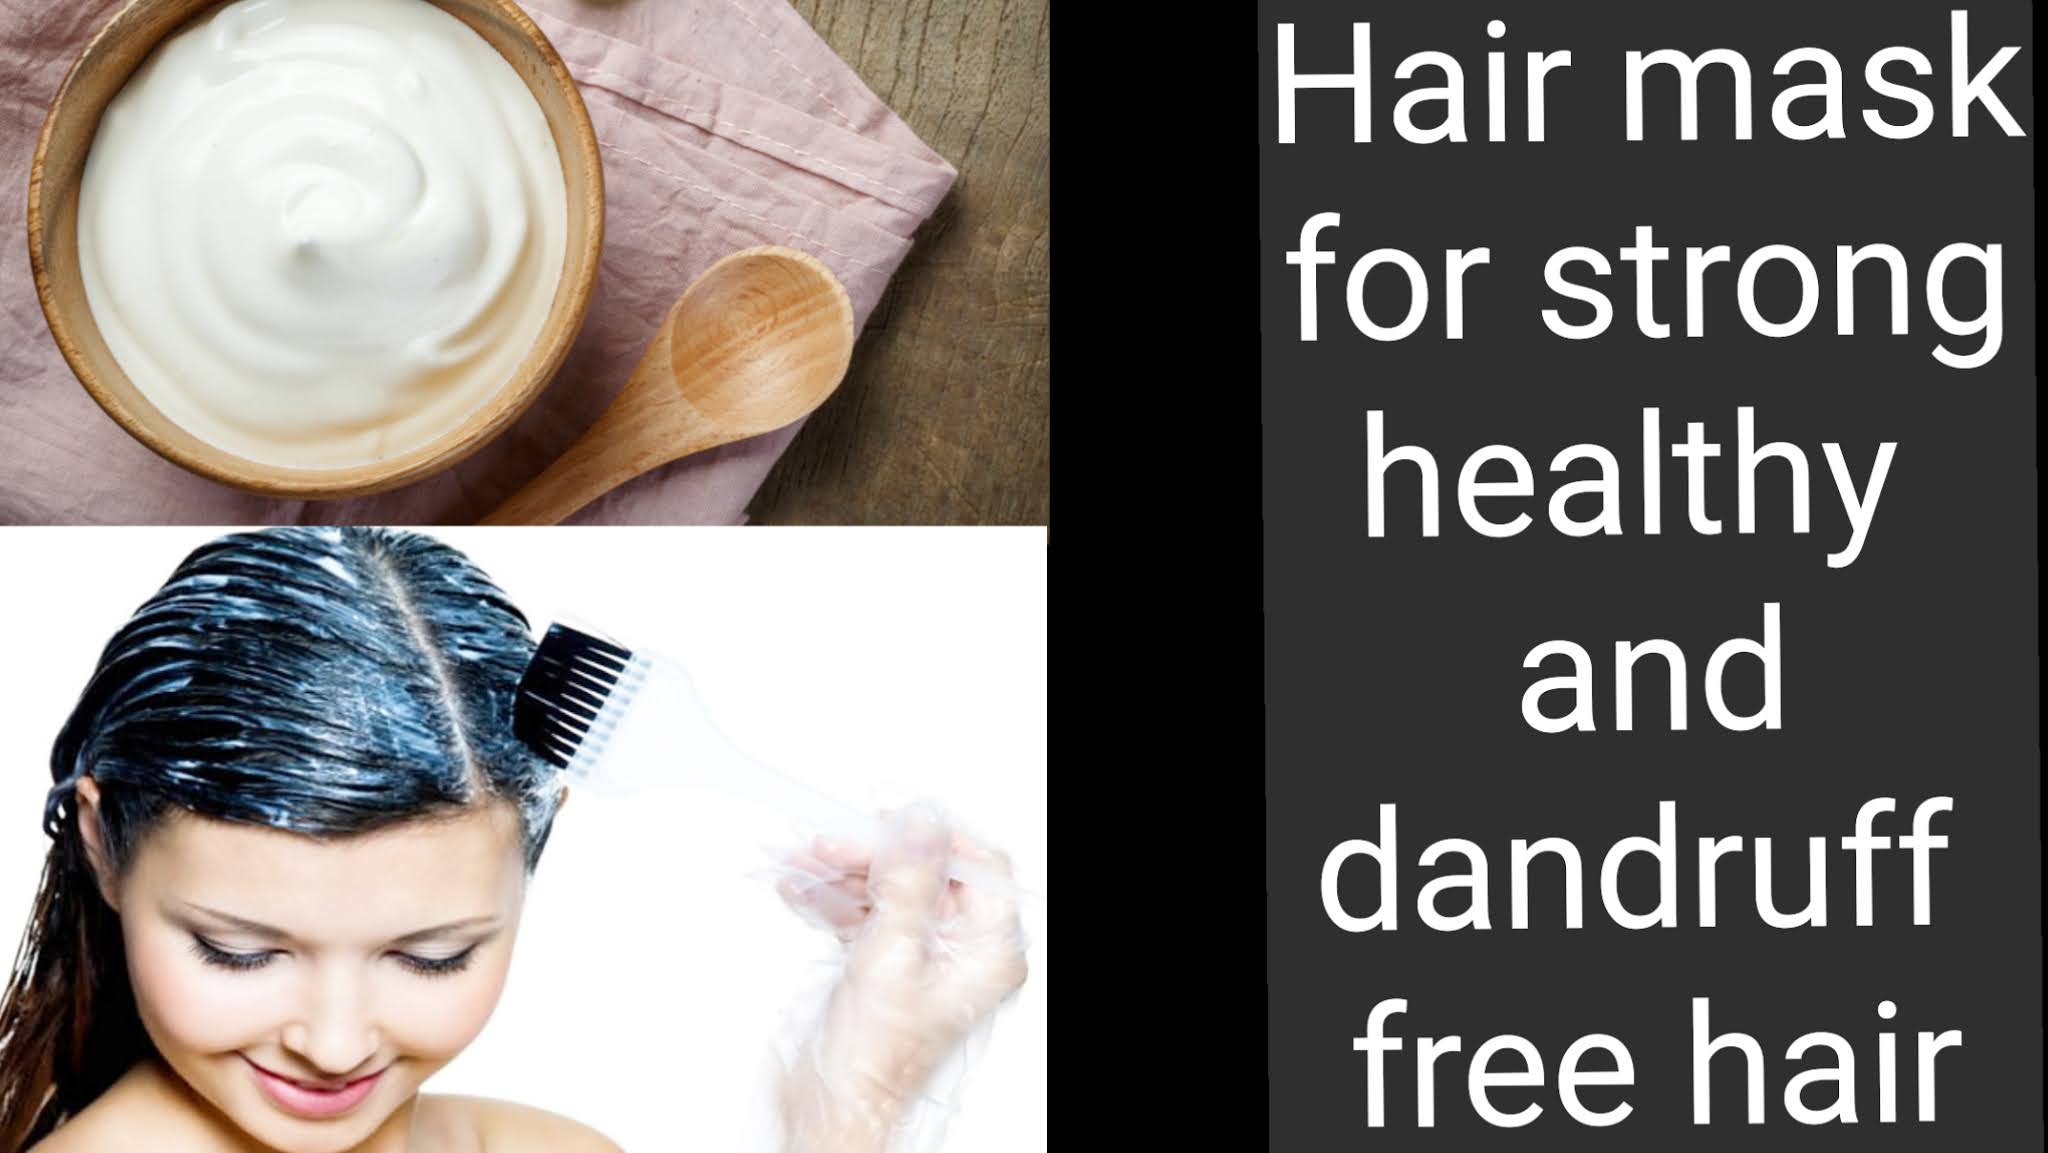 NaturalhealthyDIY: Curd For Hair: How To Use Dahi to Have Healthy Hair